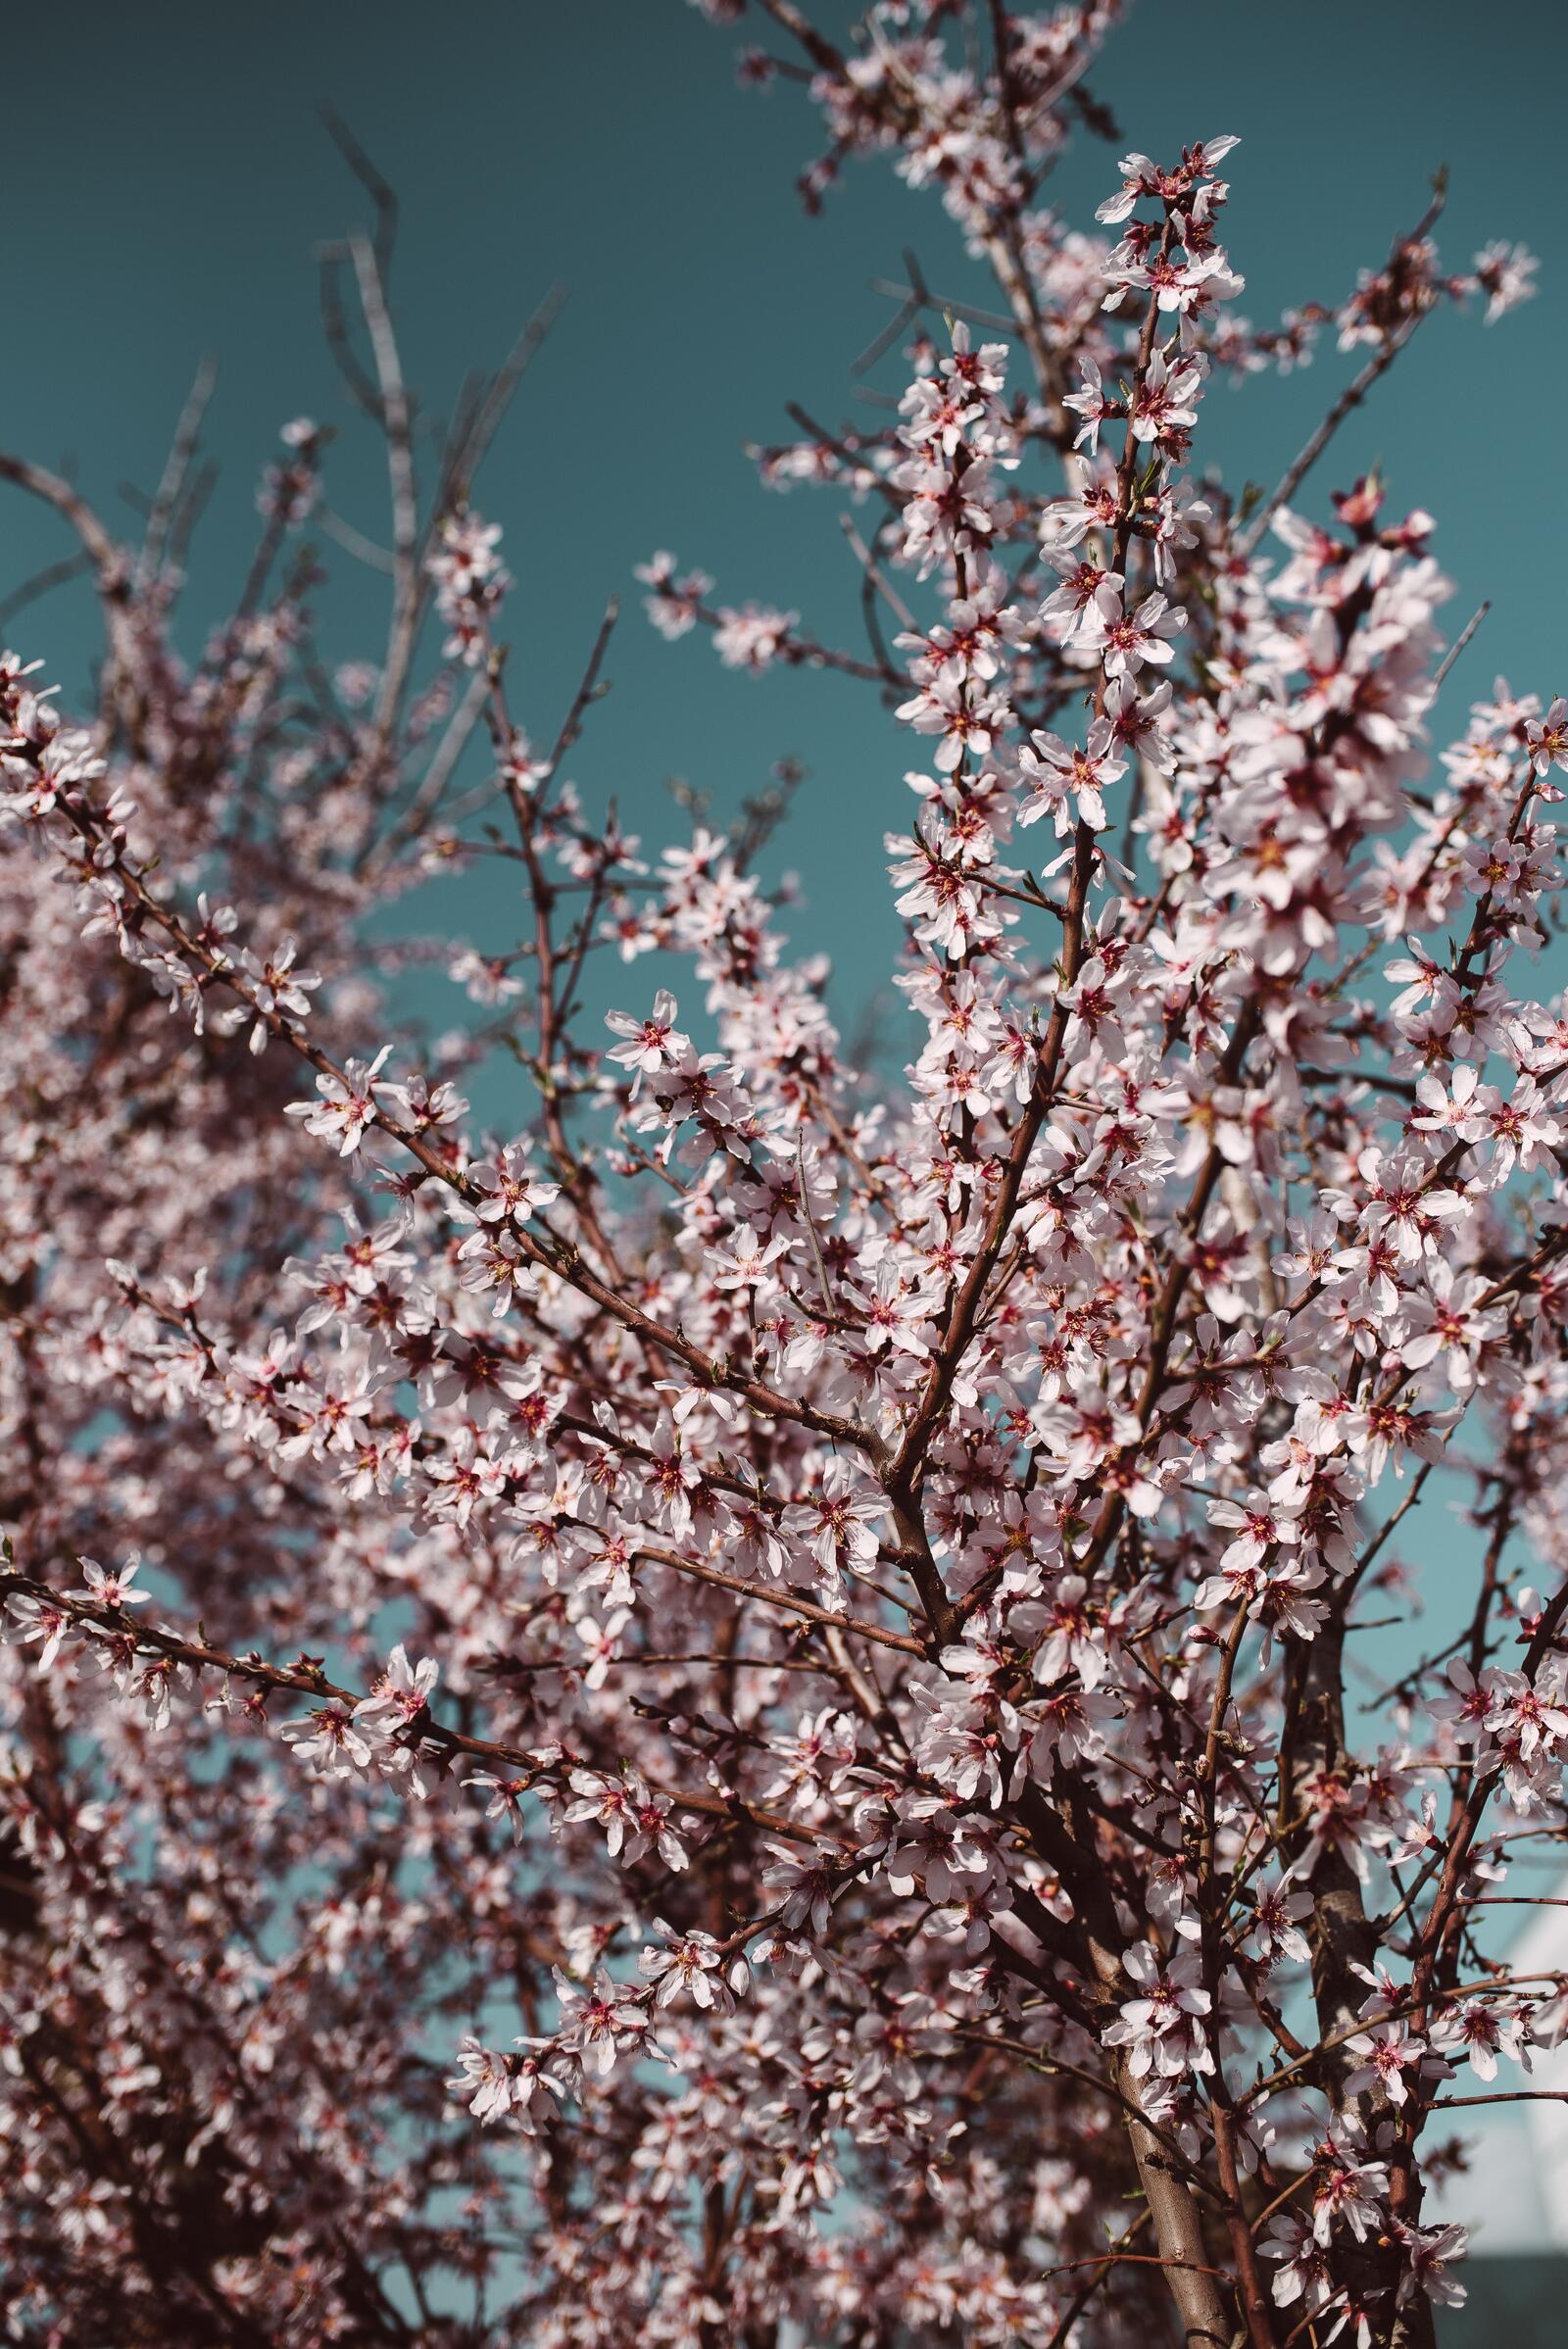 Wallpapers twigs petals cherry blossom on the desktop